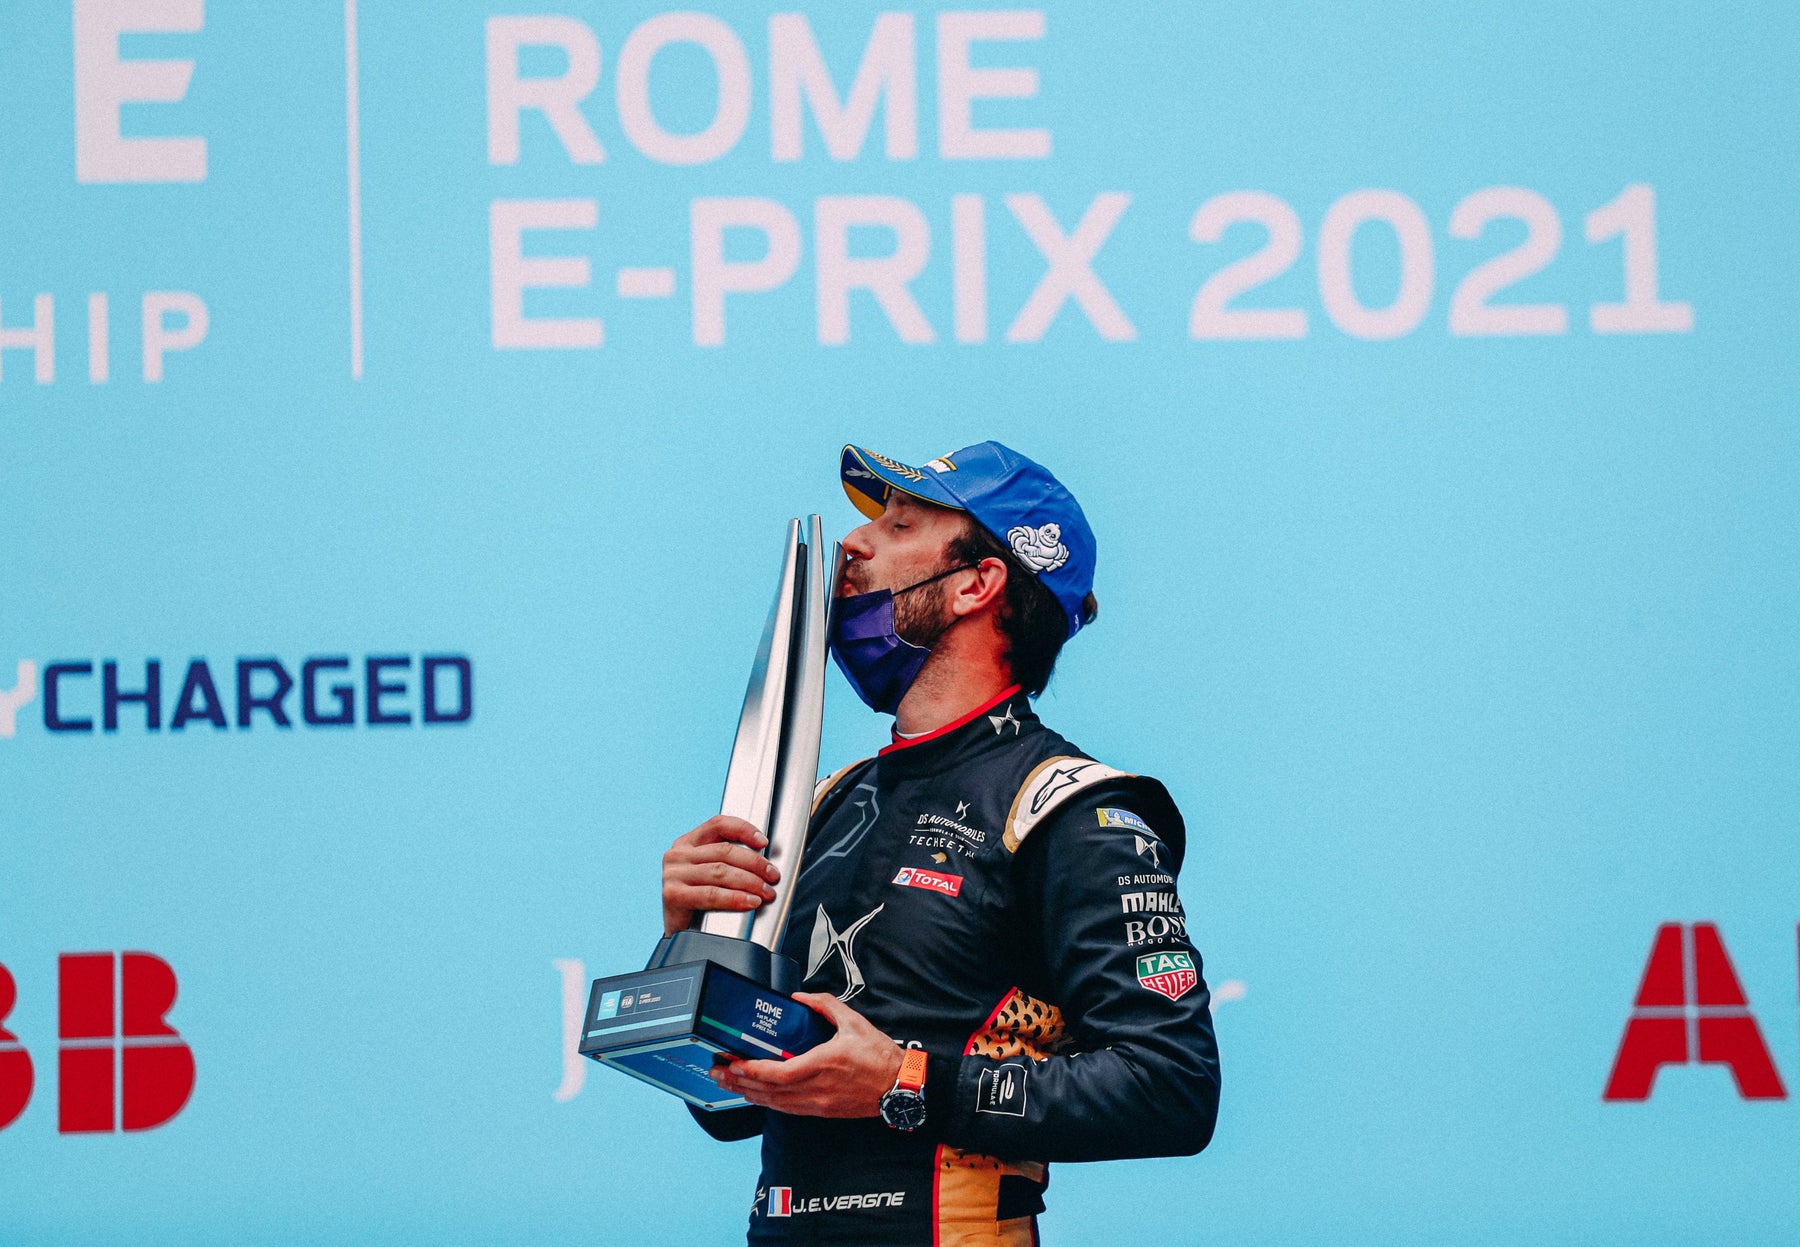 JEAN-ERIC VERGNE WINS CHAOTIC OPENING  FORMULA E E-PRIX RACE IN ROME; SAM BIRD SECOND AND MITCH EVANS THIRD